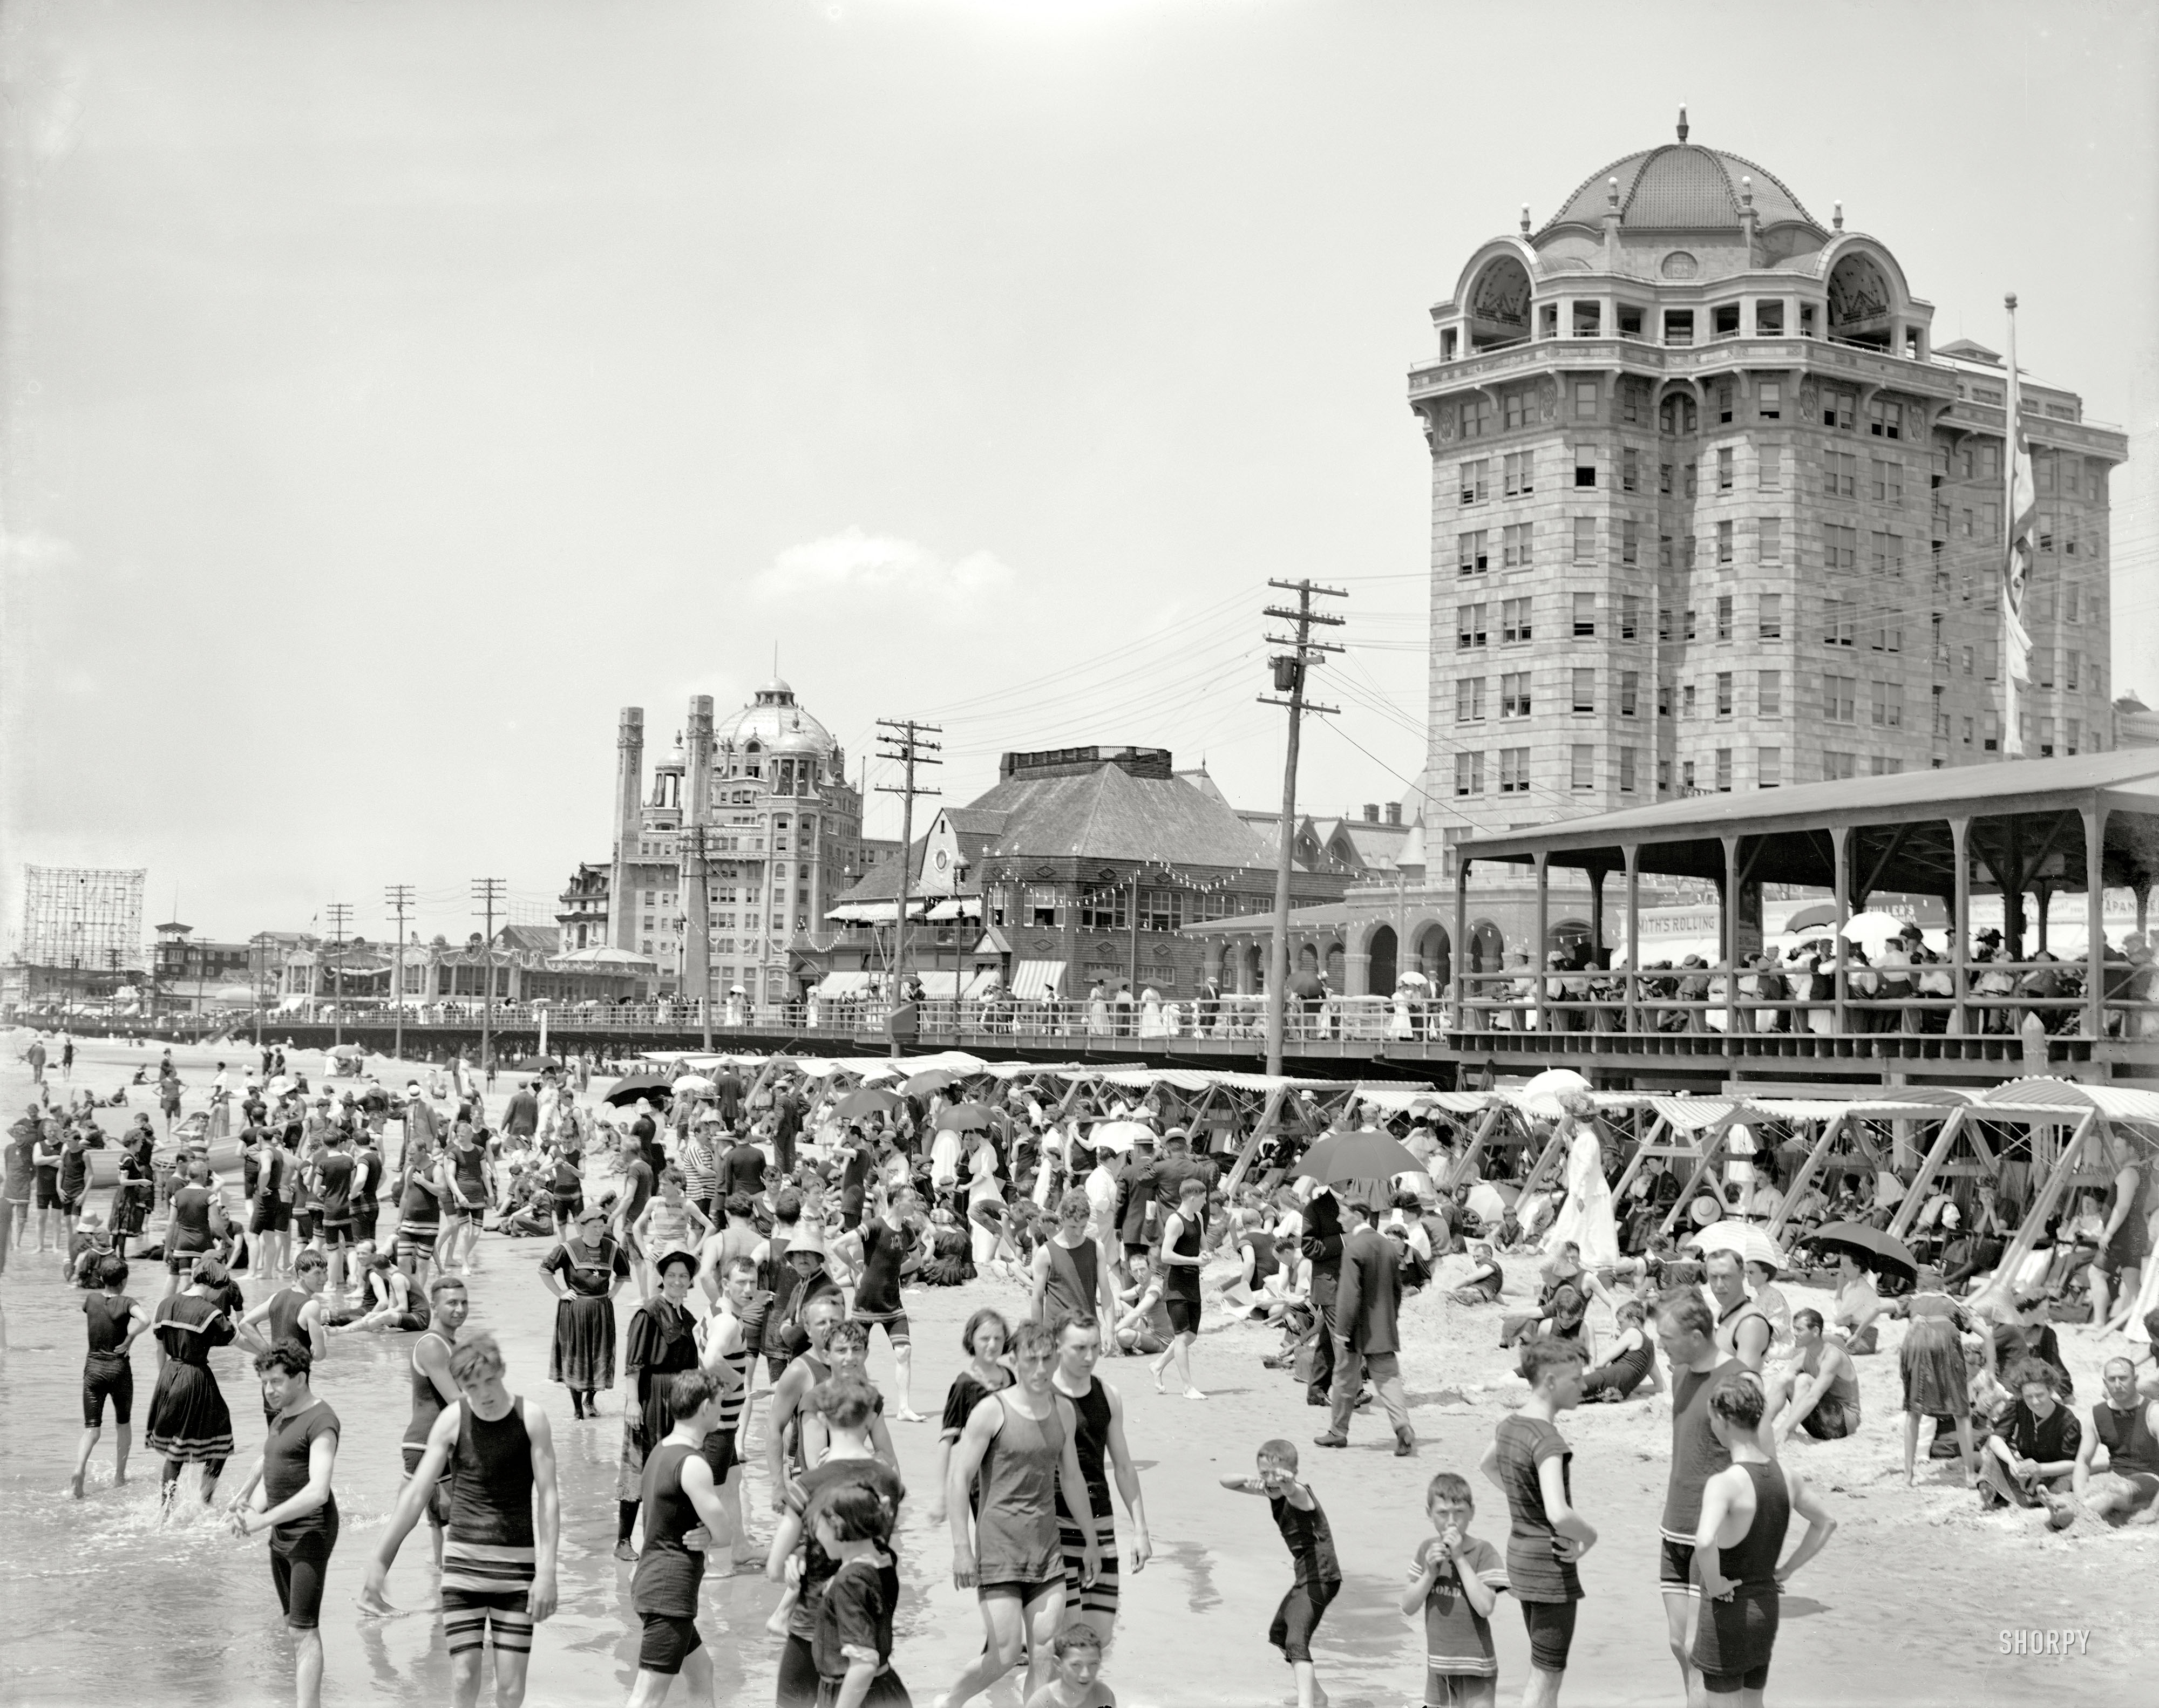 New Jersey circa 1906. "Bathers, Atlantic City." At right is the Hotel Traymore. 8x10 inch dry plate glass negative, Detroit Publishing Company. View full size.